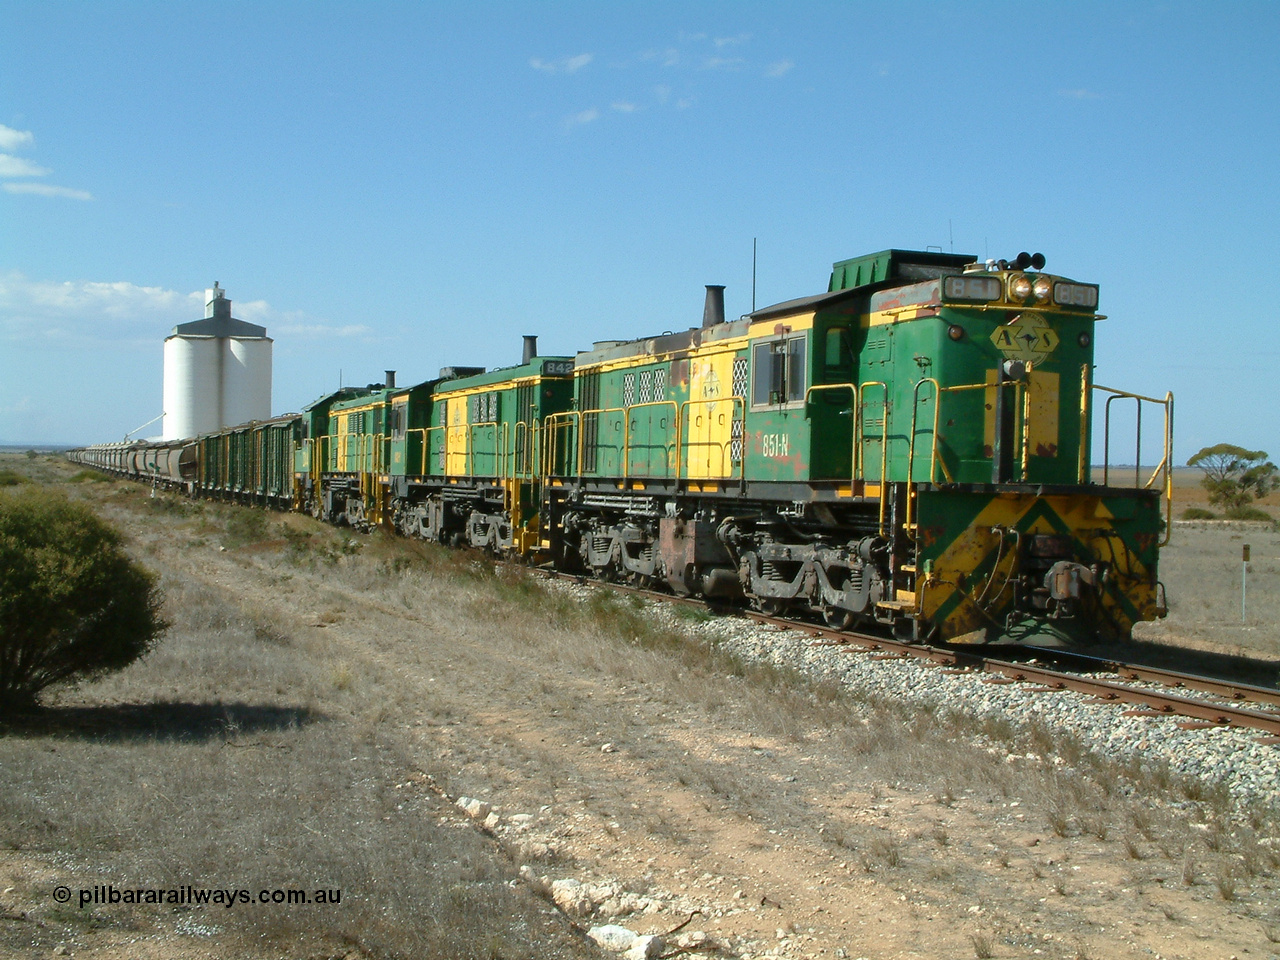 030409 141629
Wharminda, loaded grain train prepares to depart having attached extra loading behind 830 class unit 851 AE Goodwin ALCo model DL531 serial 84137, 851 has spent its entire operating career on the Eyre Peninsula, with fellow 830 class 842 serial 84140 and a rebuilt unit DA 4.
Keywords: 830-class;851;84137;AE-Goodwin;ALCo;DL531;